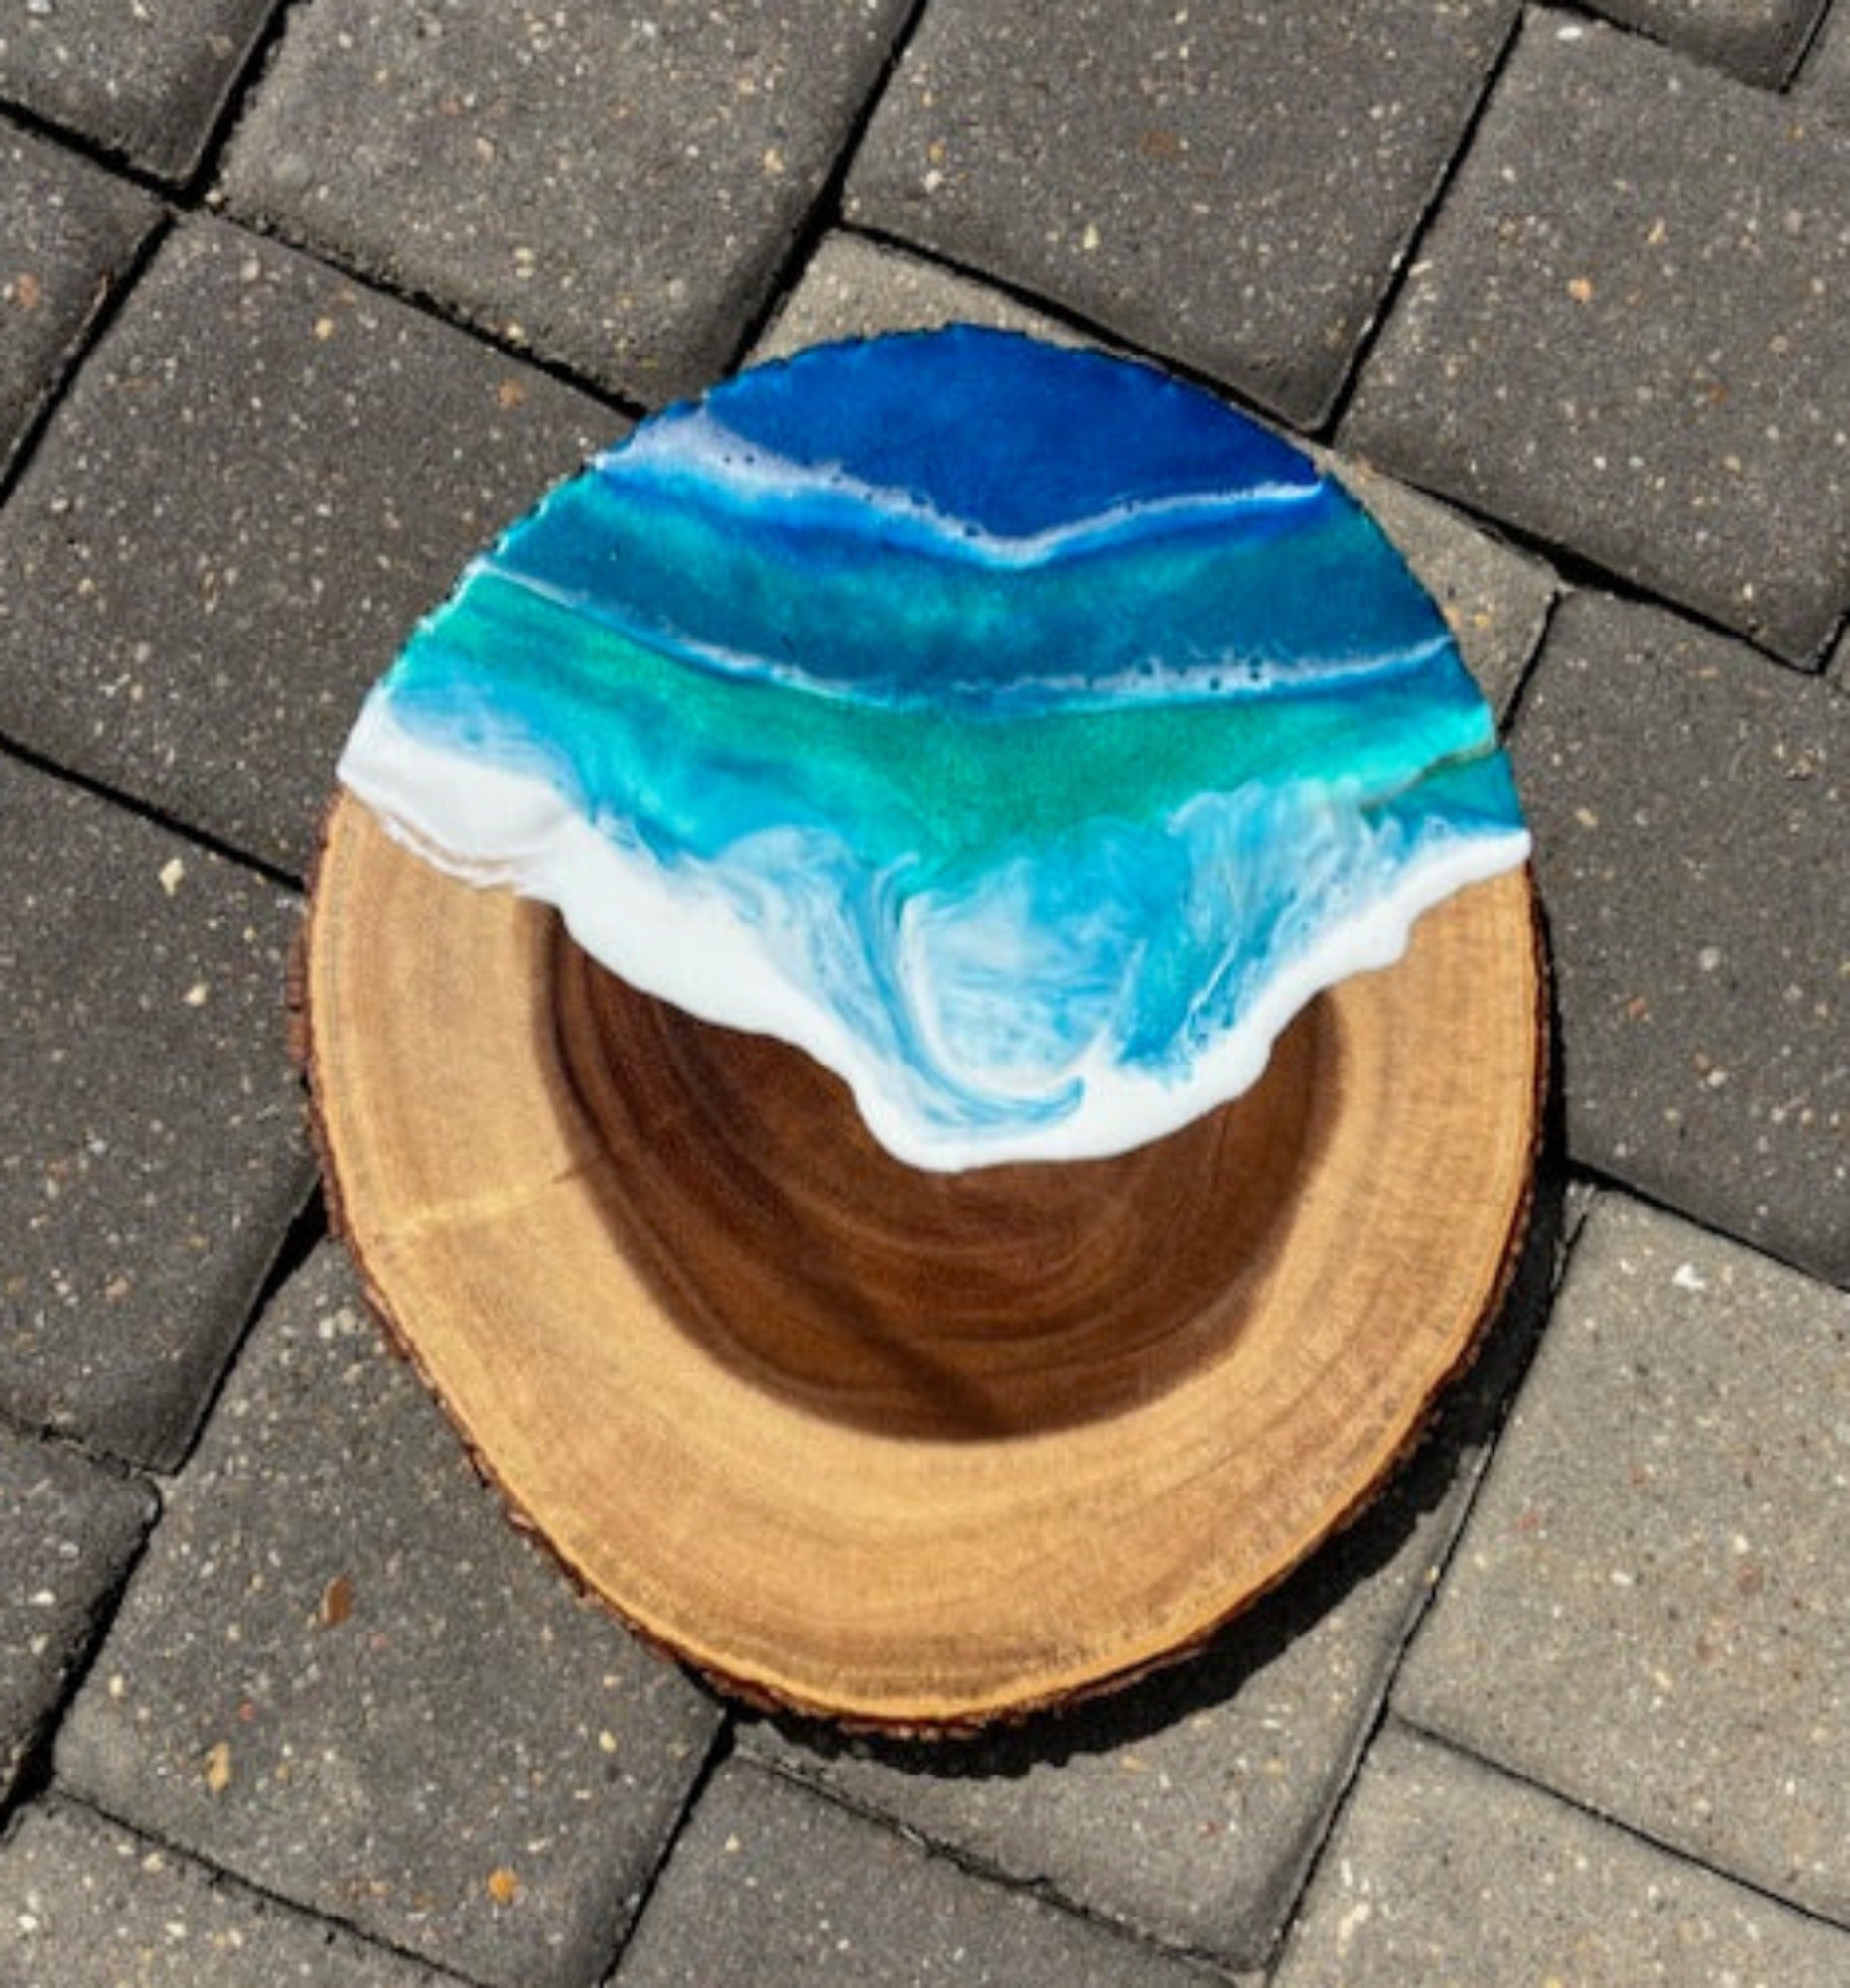 <p>Wood slice has bark all the way around. Use for charcuterie board, serving tray or display.</p> <p>Sparkling blue and green dance in foamy white waves of resin.</p> <p>Resin is food safe and heat resistant.</p> <p>Approximate size: 12.75 x 11x 1 inches</p>